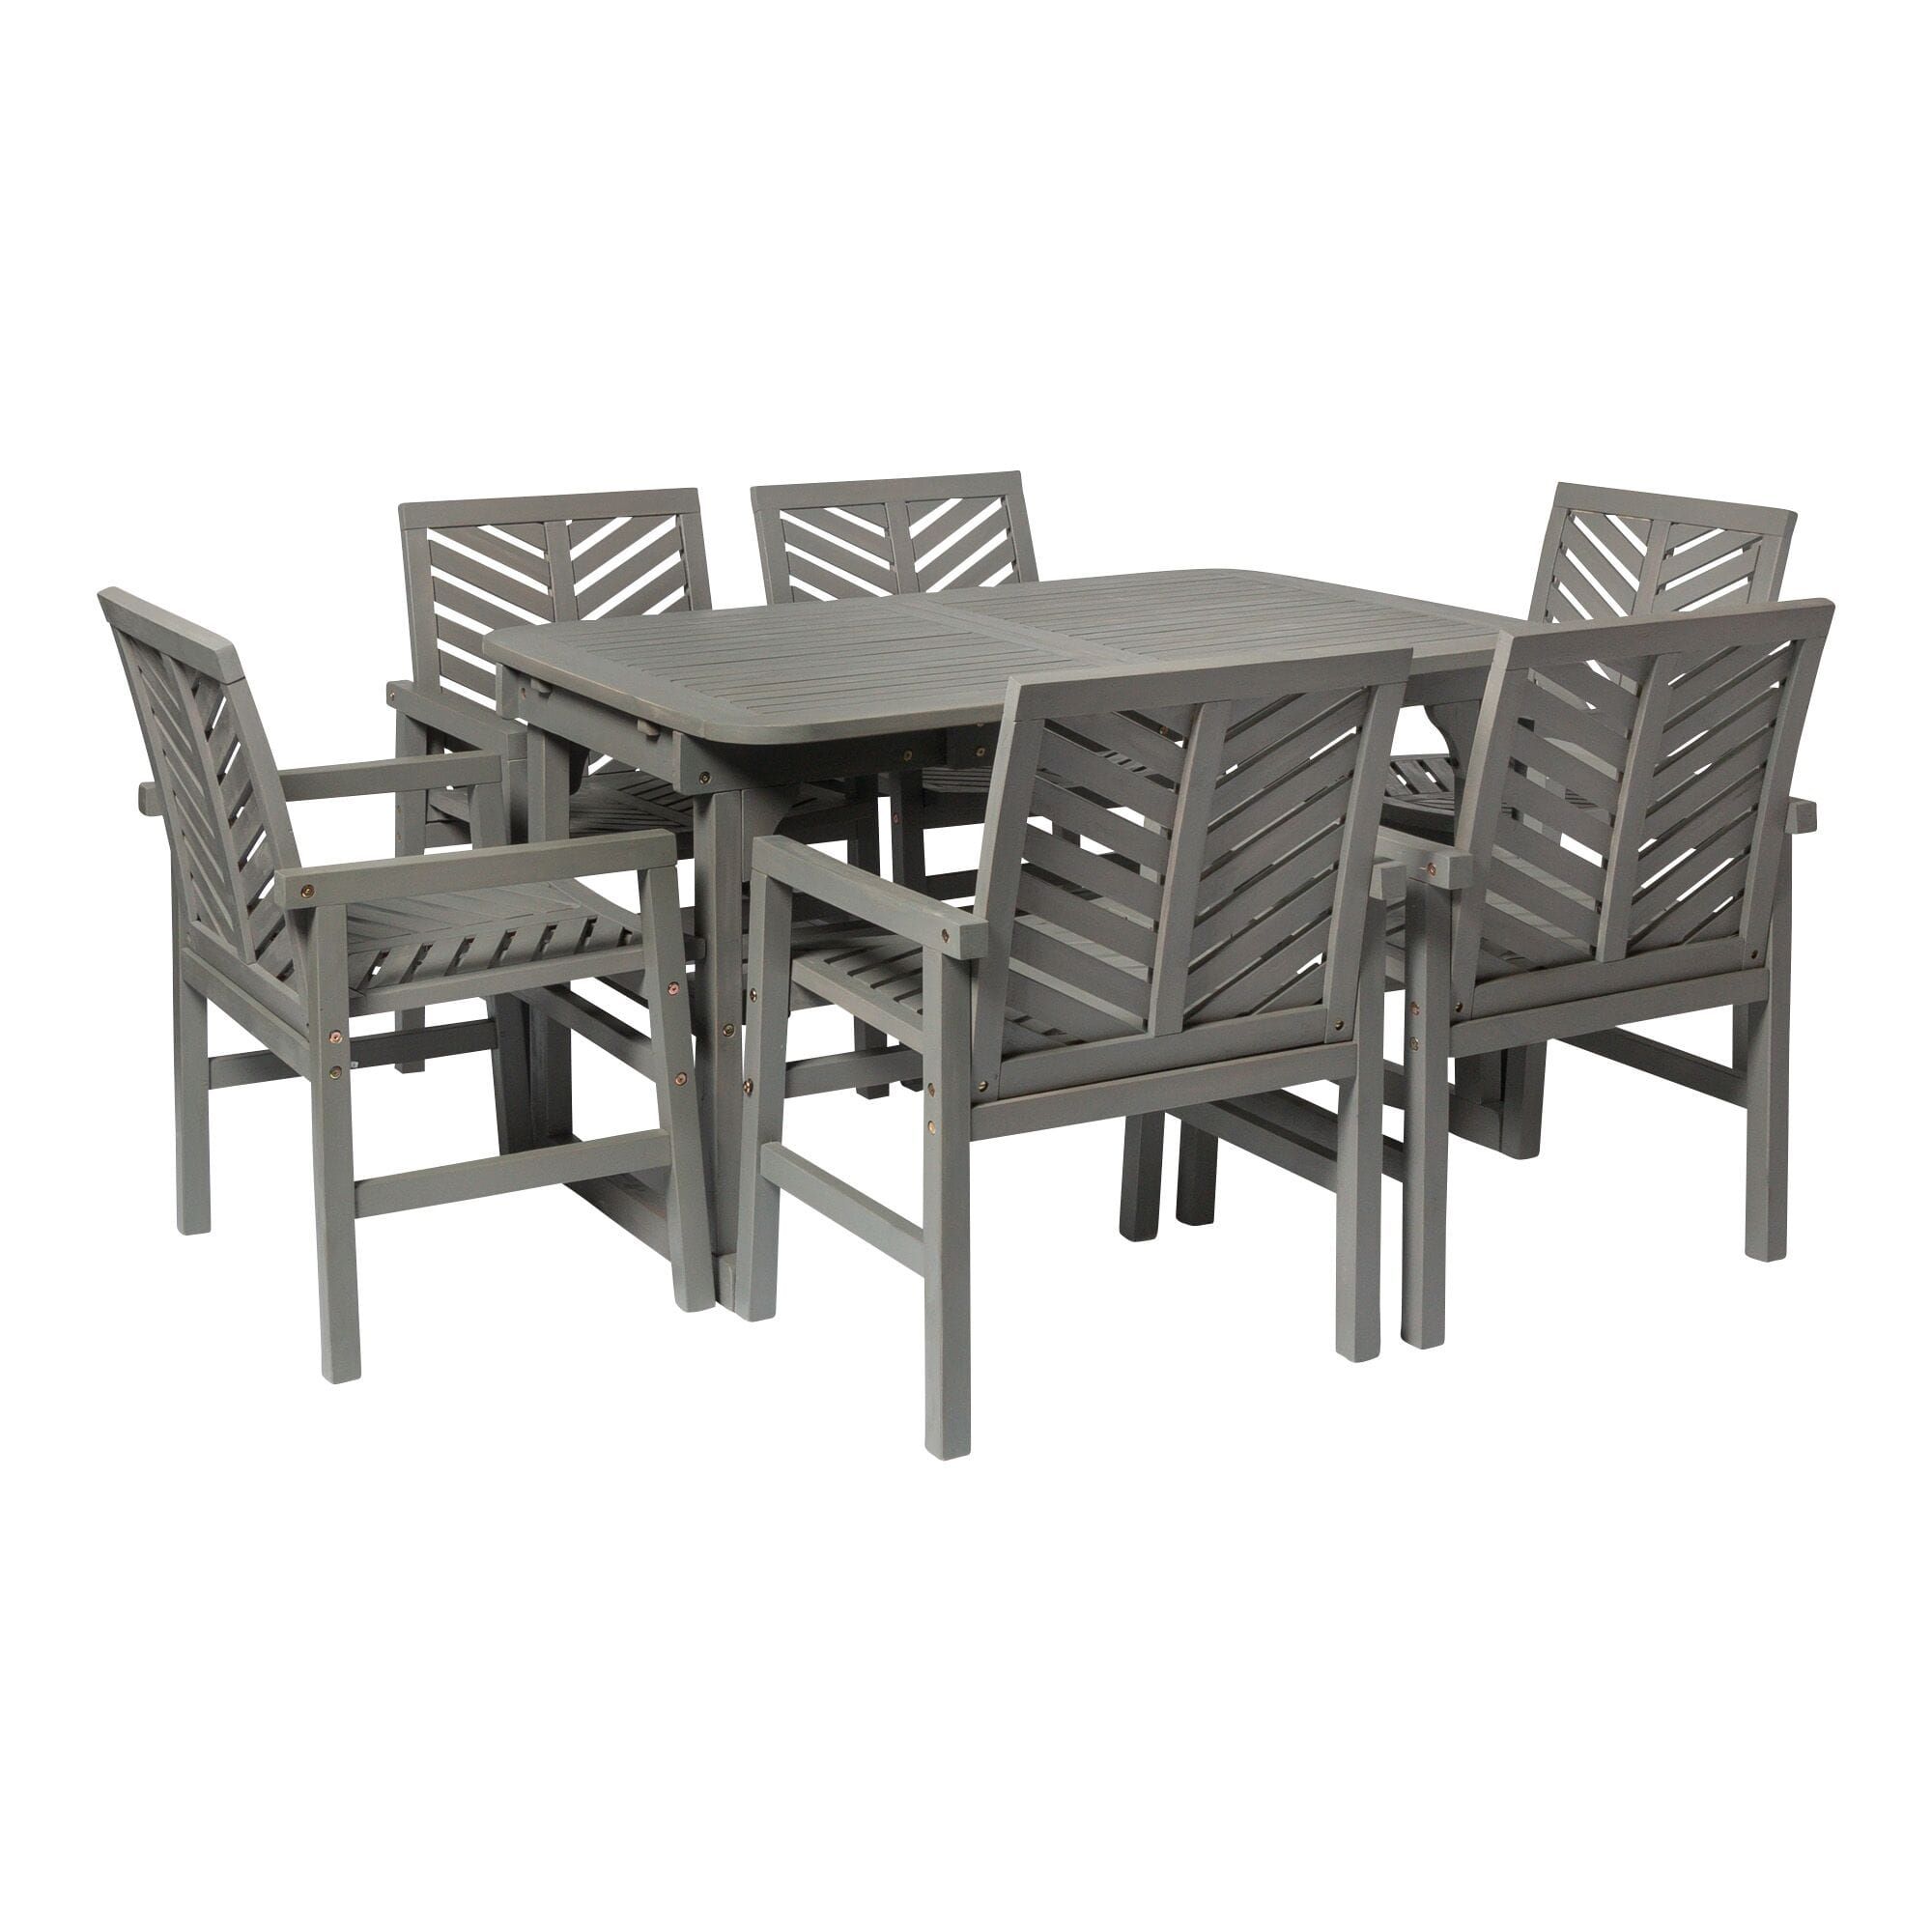 7 Piece Extendable Outdoor Patio Dining Set – Grey Washwalker Edison Intended For Gray Wicker Extendable Patio Dining Sets (View 15 of 15)